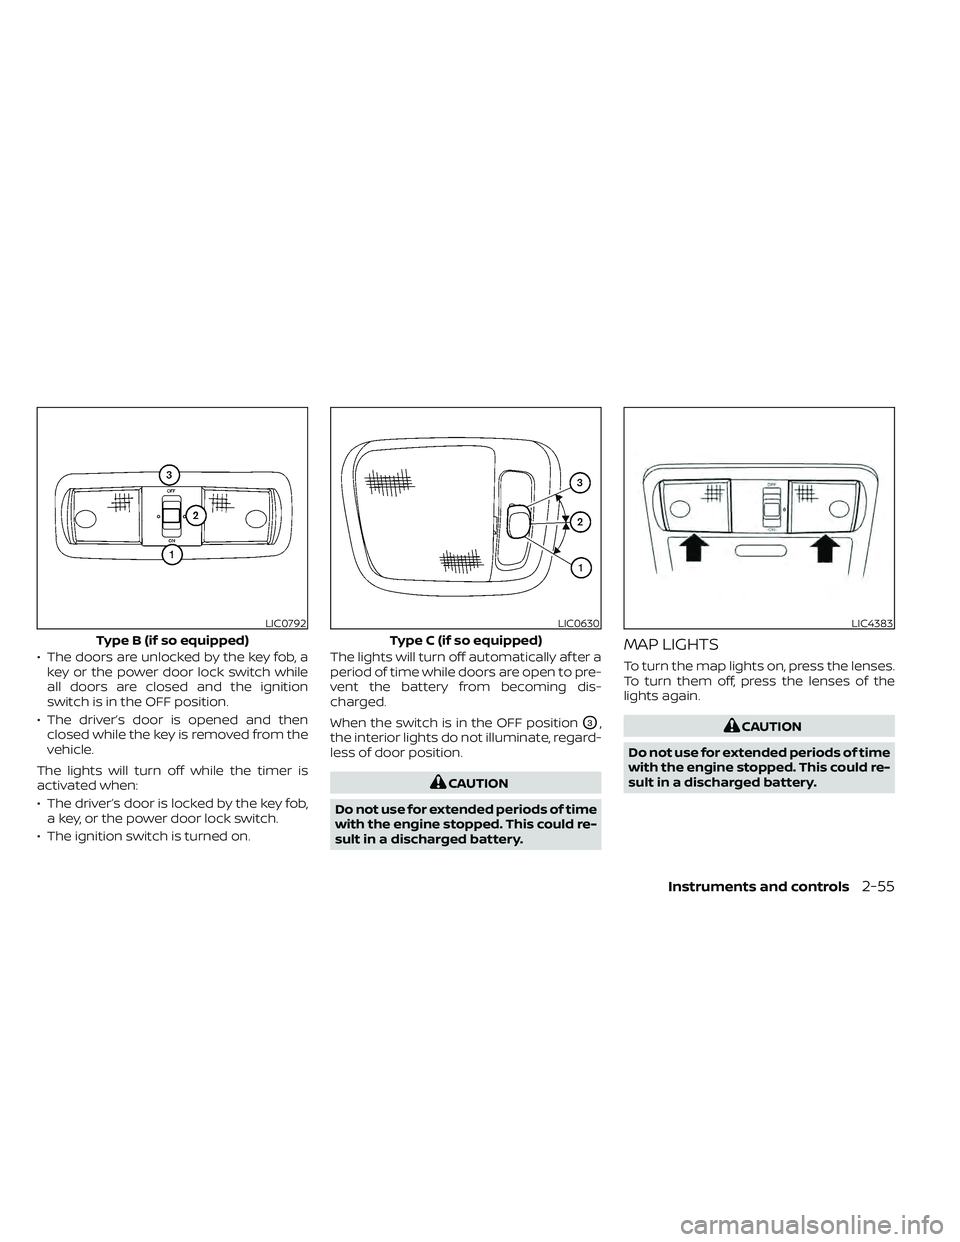 NISSAN FRONTIER 2020  Owner´s Manual • The doors are unlocked by the key fob, akey or the power door lock switch while
all doors are closed and the ignition
switch is in the OFF position.
• The driver’s door is opened and then clos